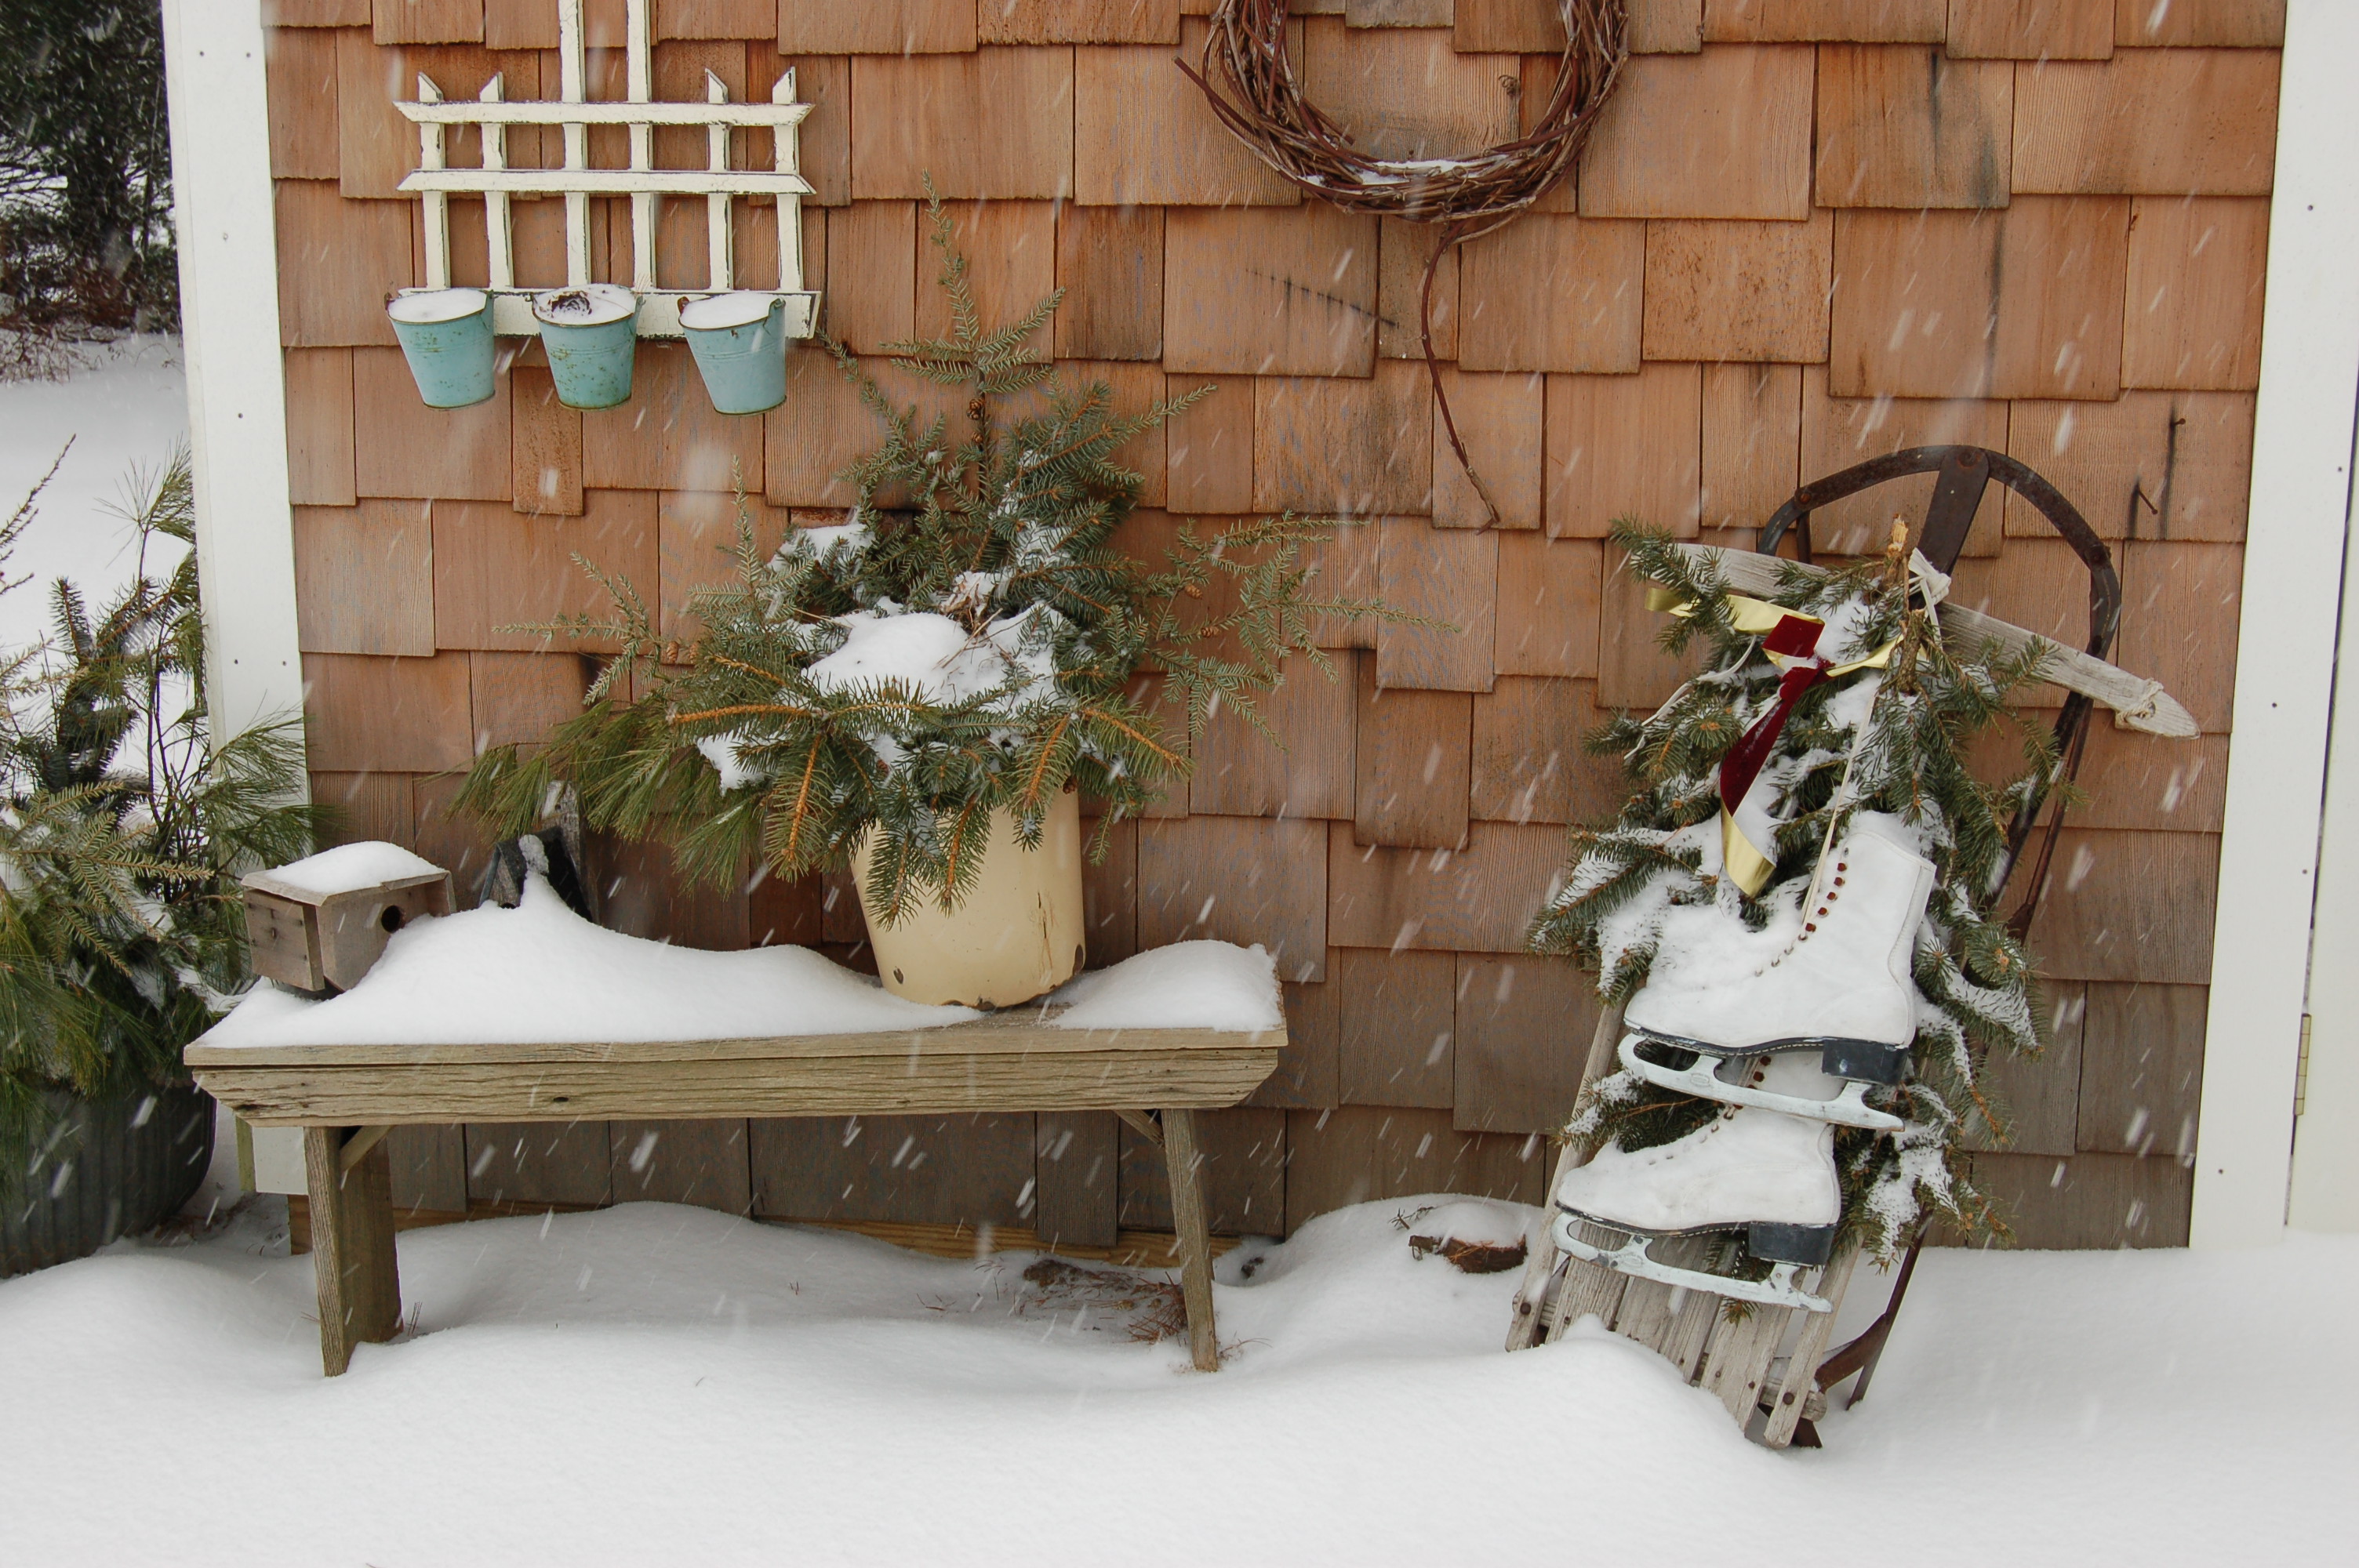 Snowy decorations by Bruce Stambaugh